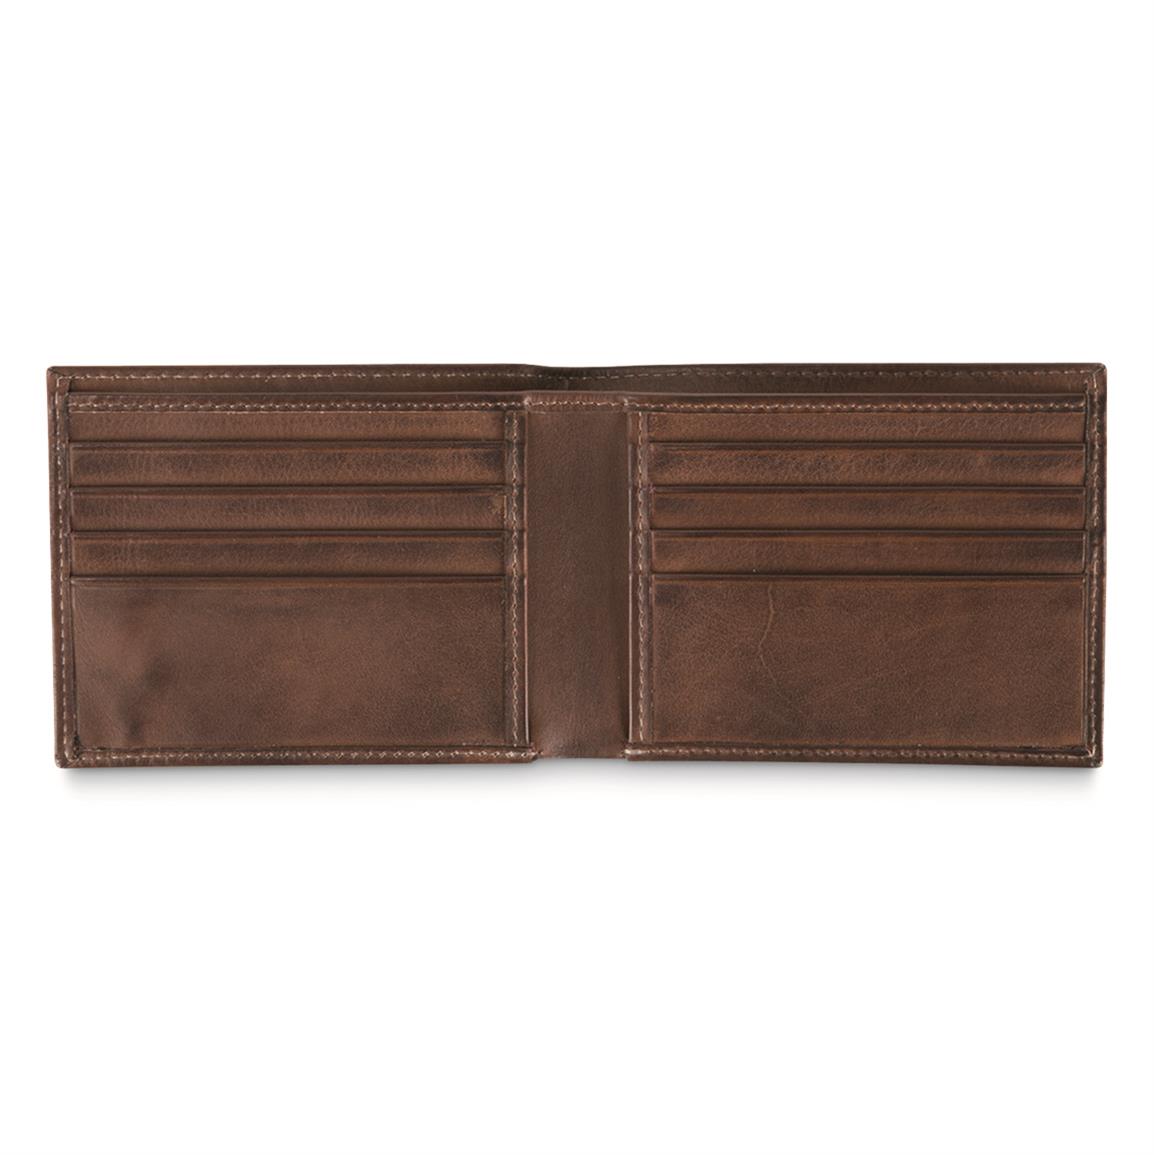 Ariat Scratch Flag Bifold Wallet - 731469, Wallets at Sportsman's Guide